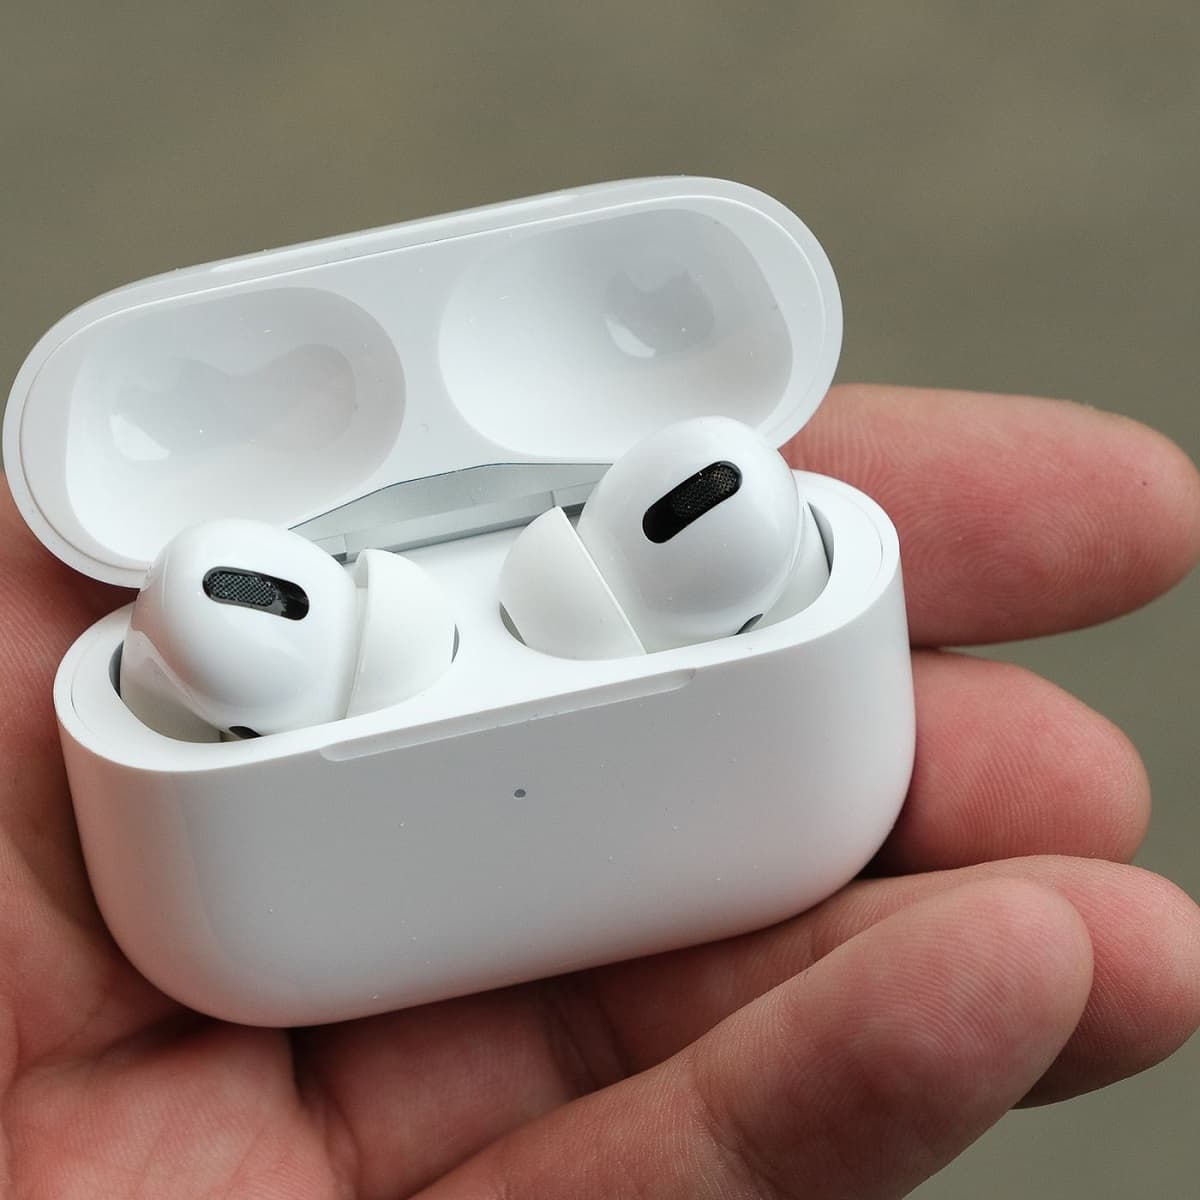 Apple AirPods Pro is reportedly going to launch with a USB Type-C port